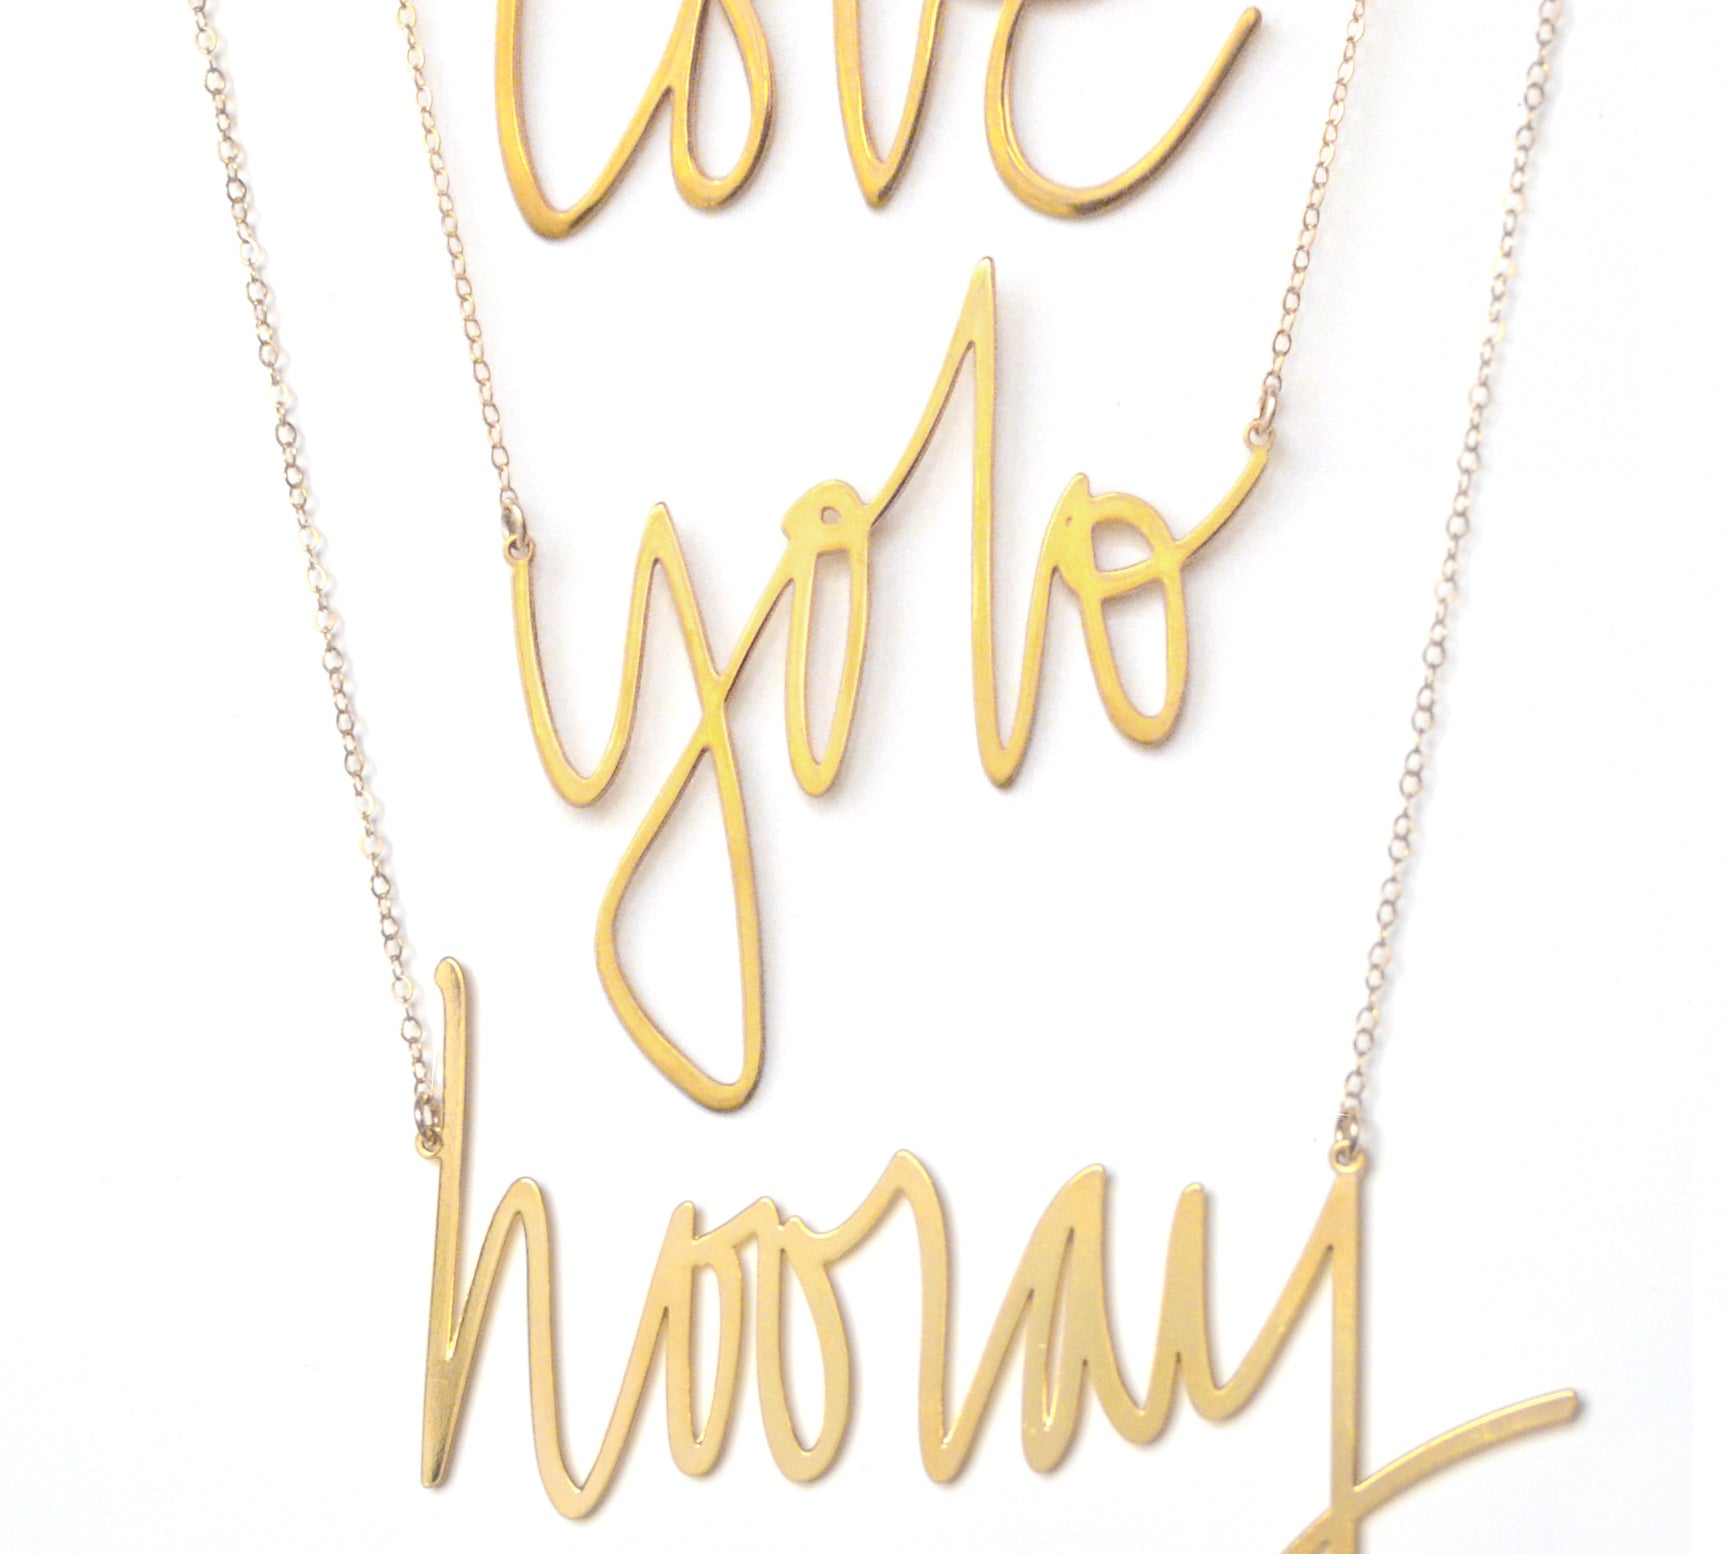 Holiday Cheer Gift Set - High Quality, Hand Written, Self Love Word Gift Set Necklaces To Celebrate With - Featuring the Words Love, Yolo, Cheers, Happy, Hooray, Hope, Joy - Available in Gold and Silver - Small and Large Sizes - Made in USA - Brevity Jewelry